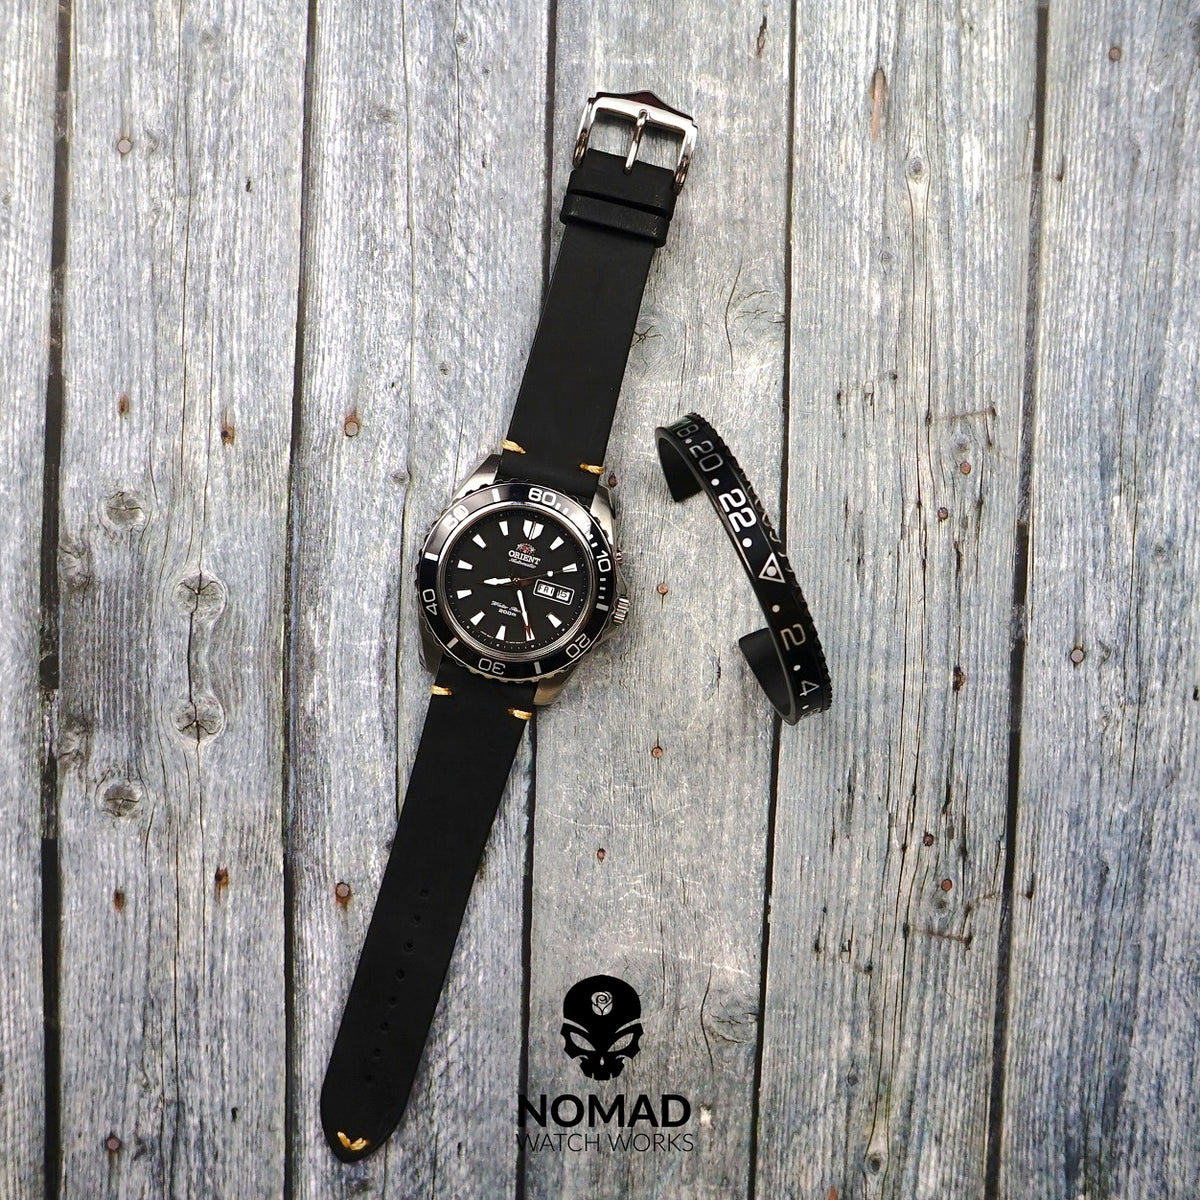 Premium Vintage Calf Leather Watch Strap in Black (20mm) - Nomad Watch Works Malaysia